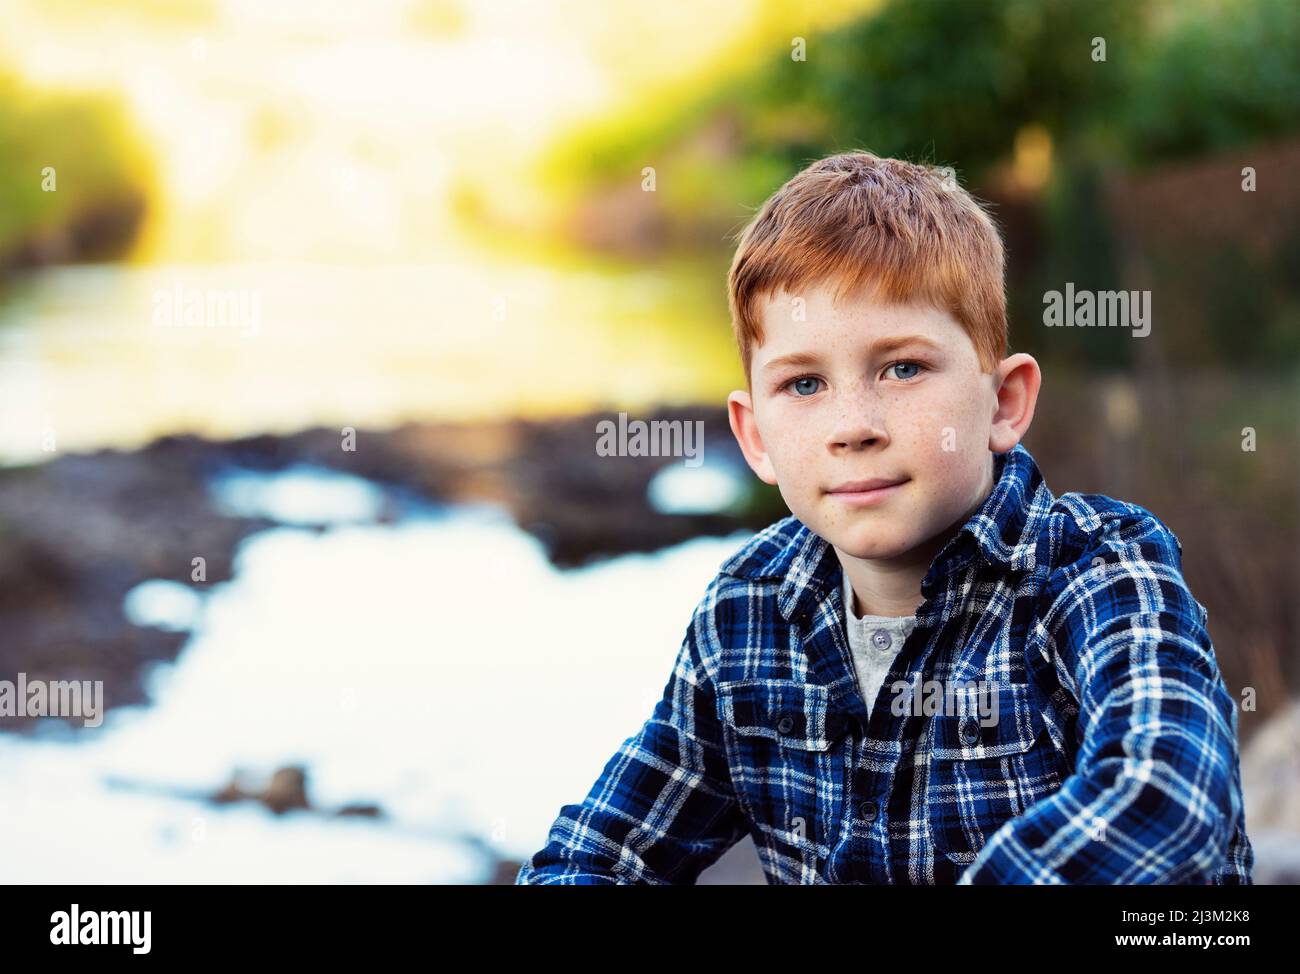 Outdoor portrait of a boy with red hair, freckles and blue eyes; Edmonton, Alberta, Canada Stock Photo